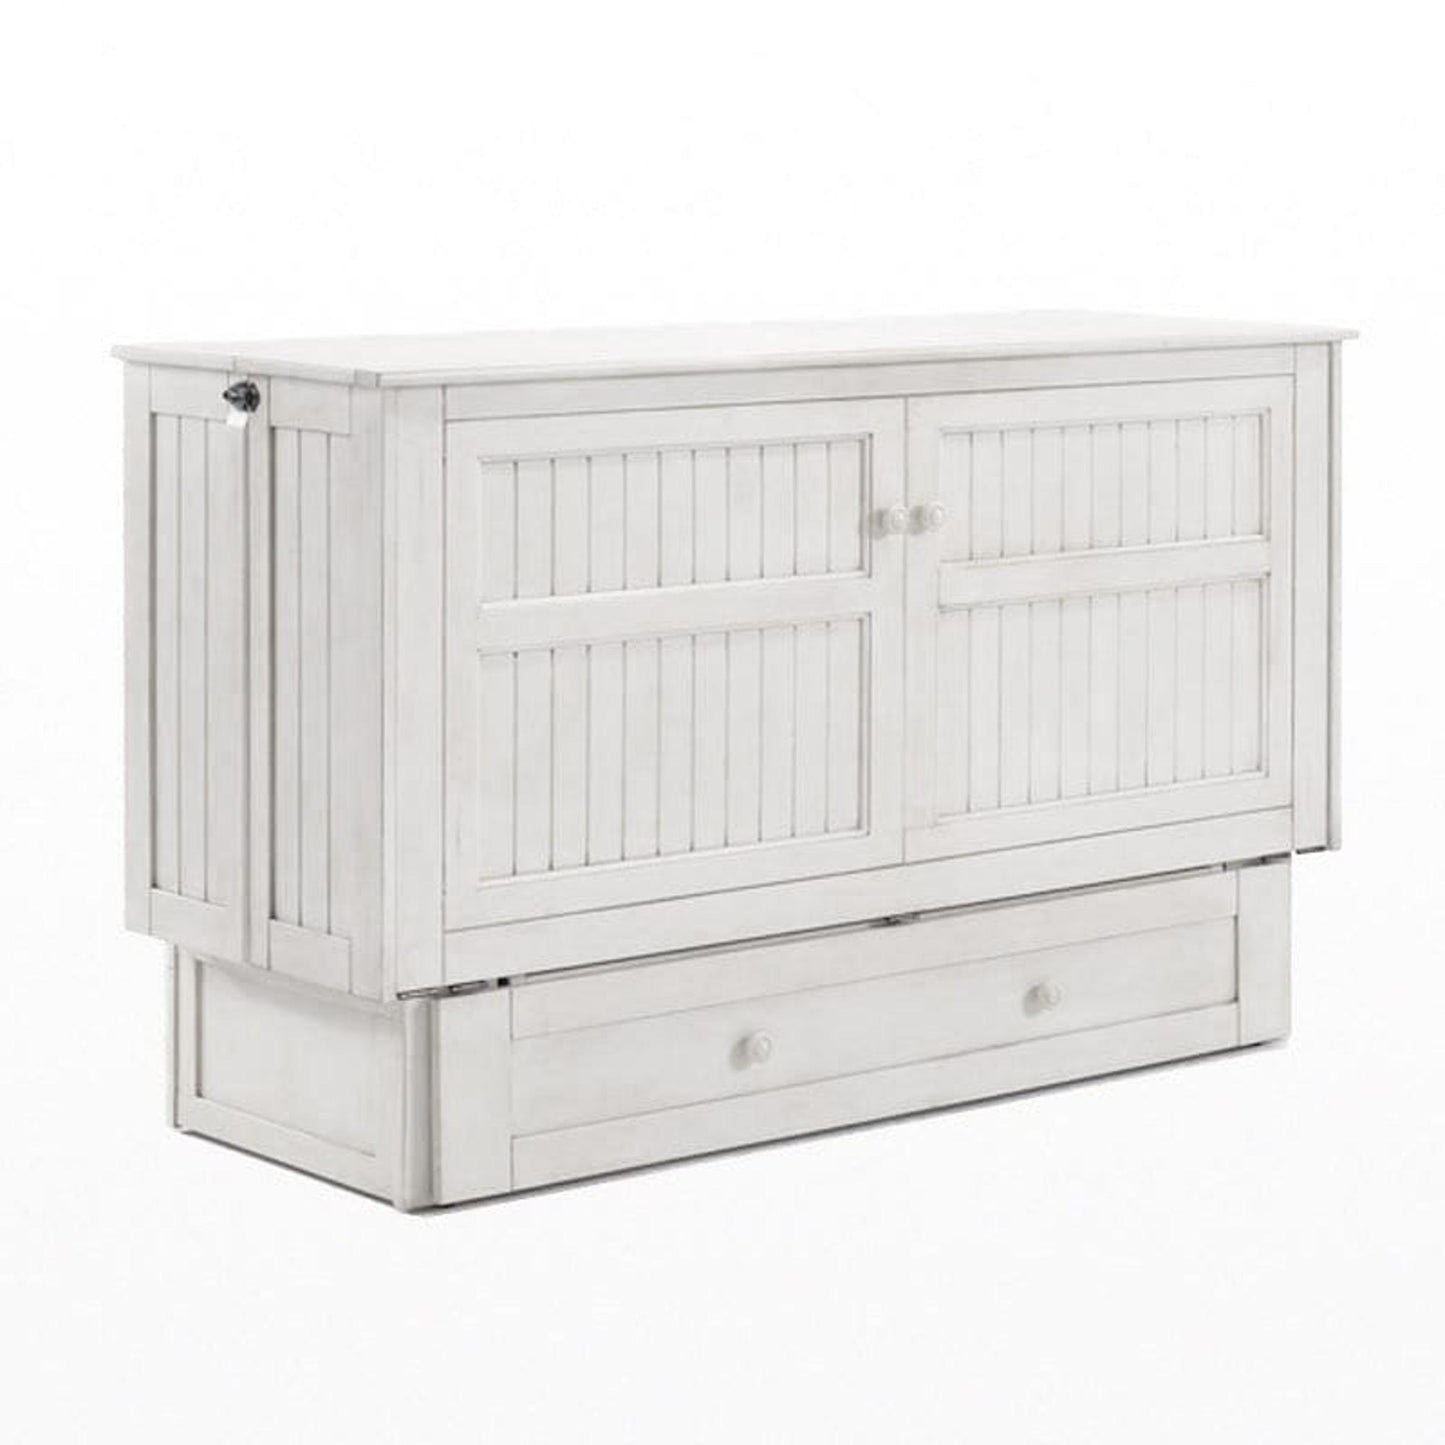 Daisy Murphy Cabinet Bed in White